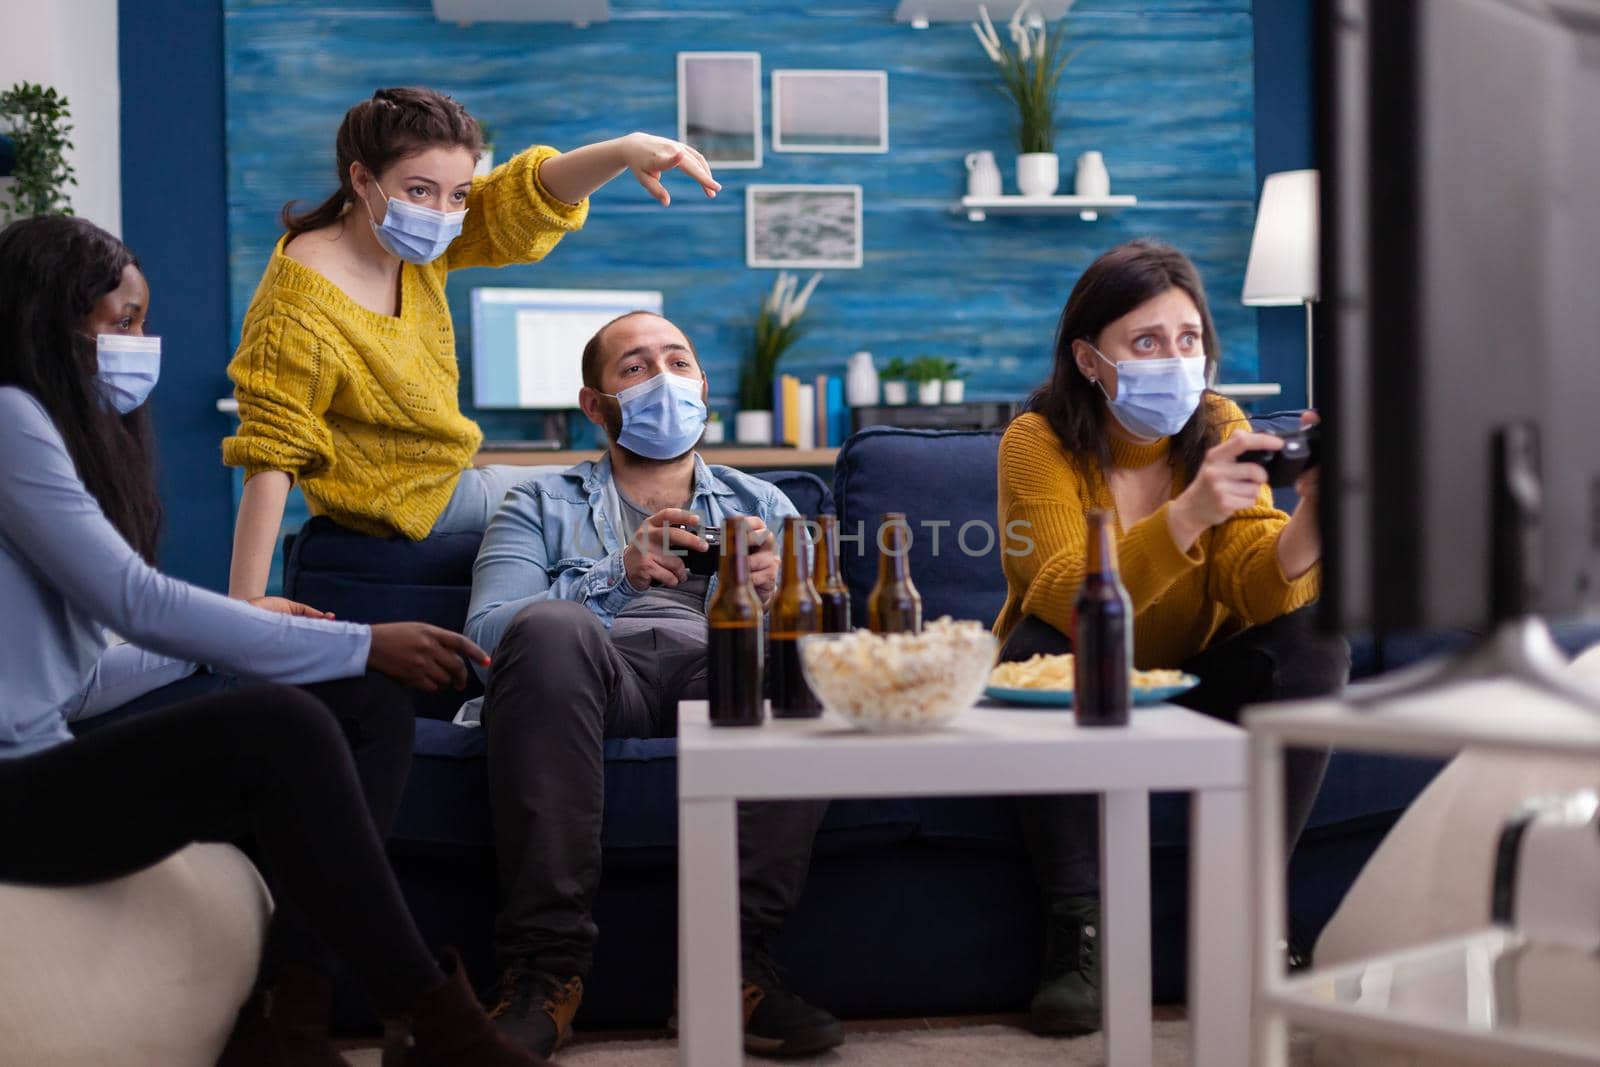 Cheerful multiracial friends playing video games with joystick controller in apartment living room wearing face mask to prevent spreading coronavirus. Conceptual image.